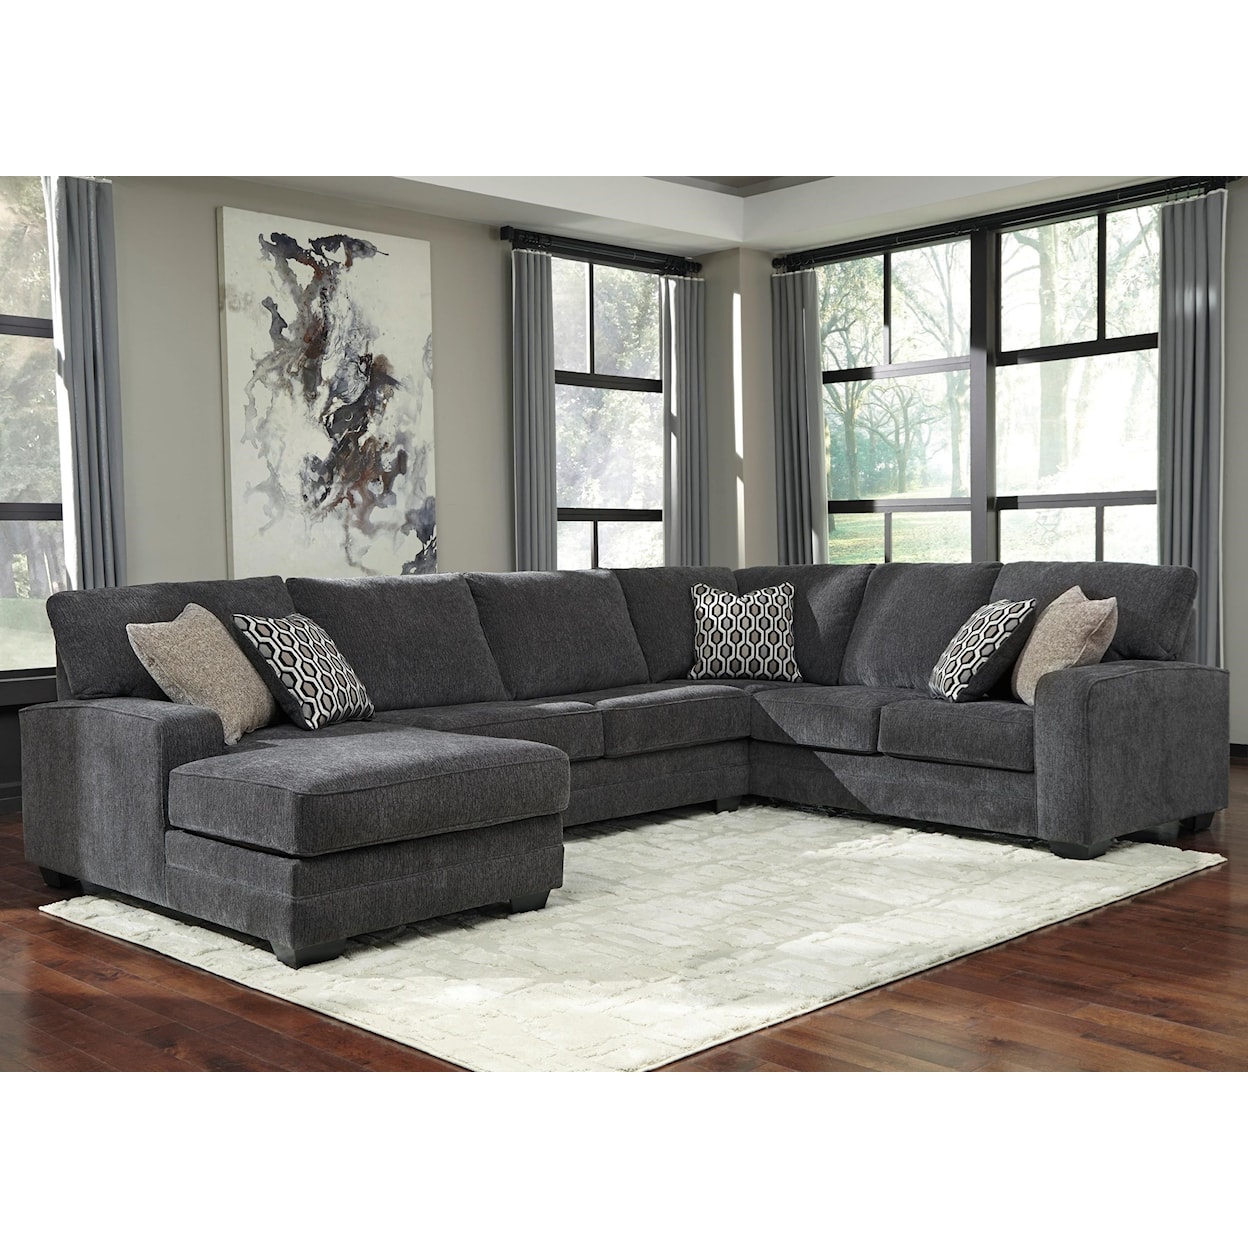 Ashley Furniture Benchcraft Tracling Sectional with Left Chaise